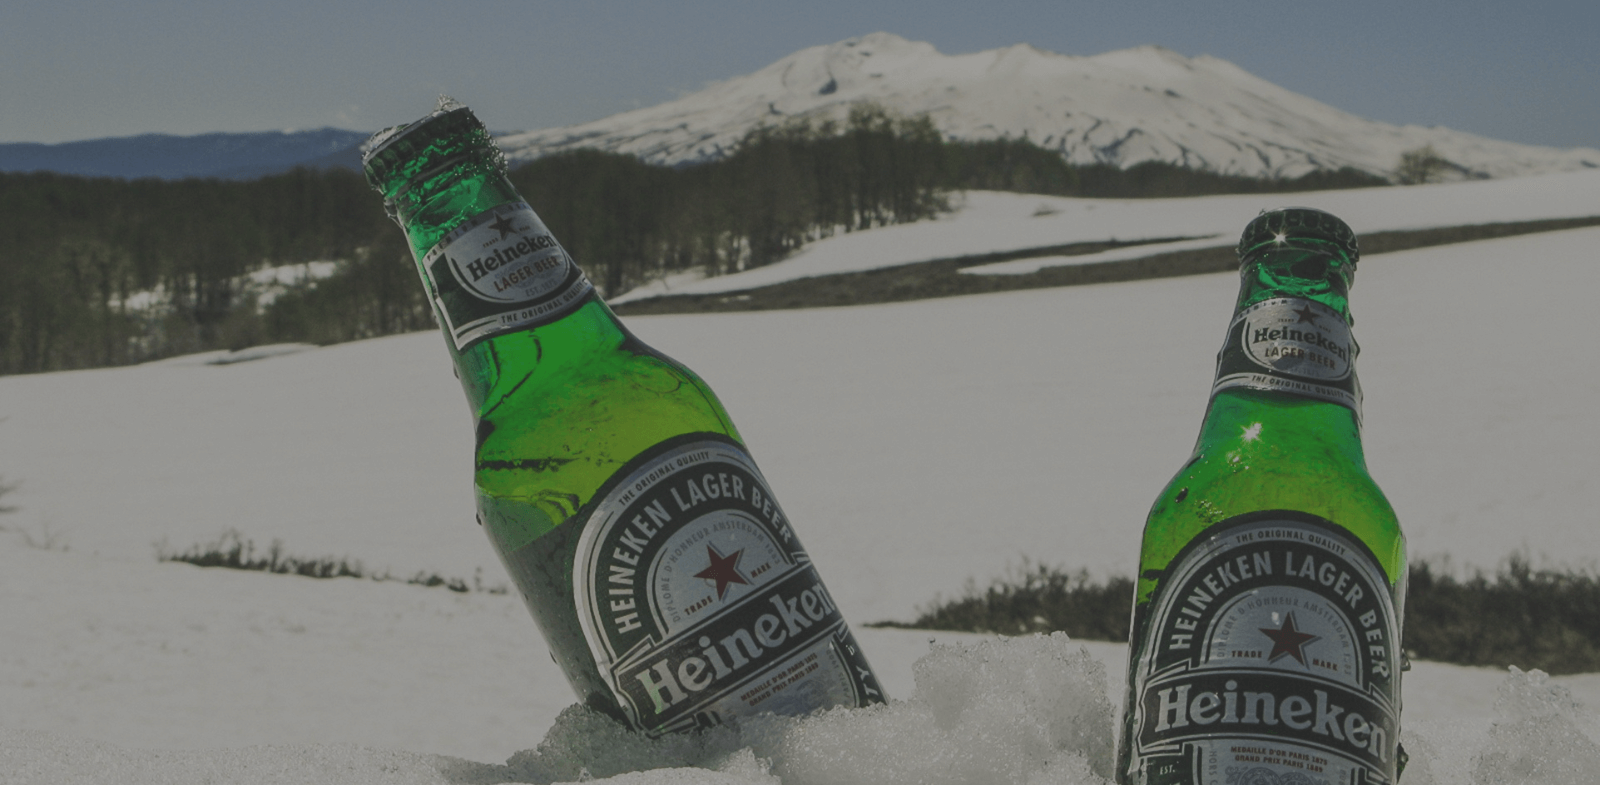 Two bottles of Heineken Lager in the snow with mountain in background